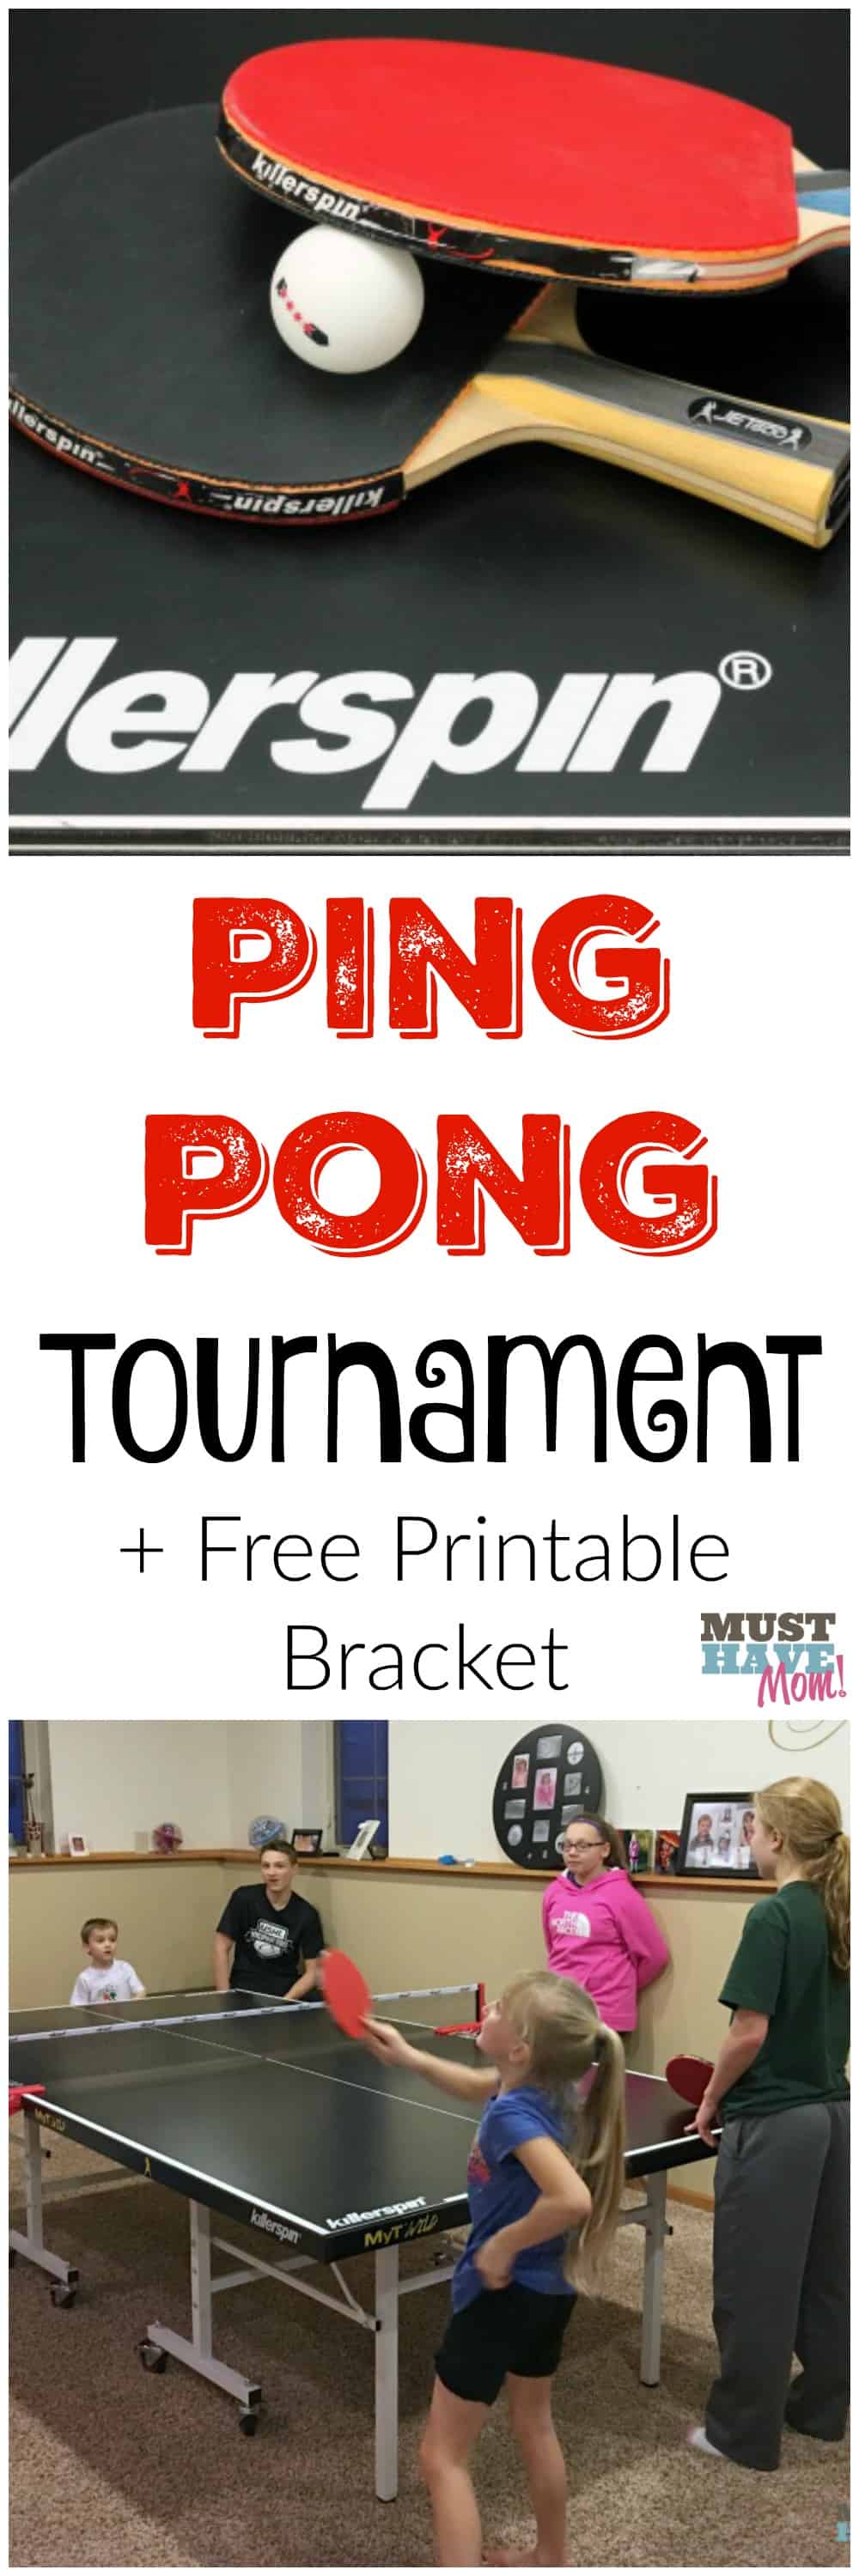 How To Host A Family Ping Pong Tournament + Free Printable Tournament Bracket Sheet